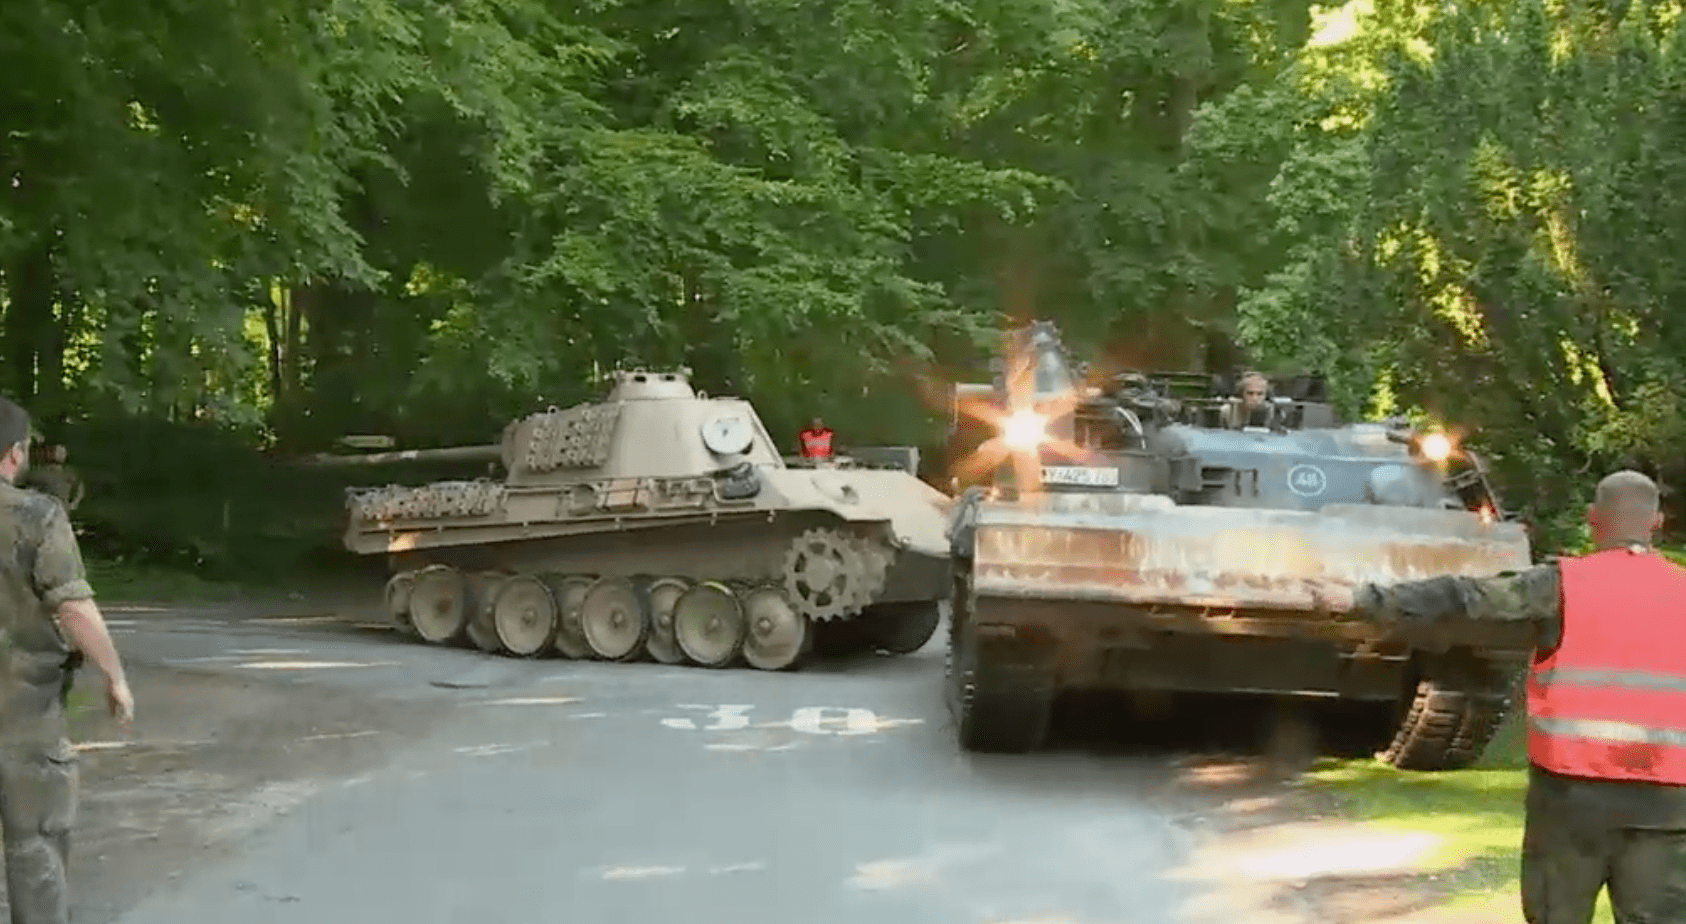 YouTube screen capture-- German authorities removed the Panther tank from the 84-year-old's property in 2015.